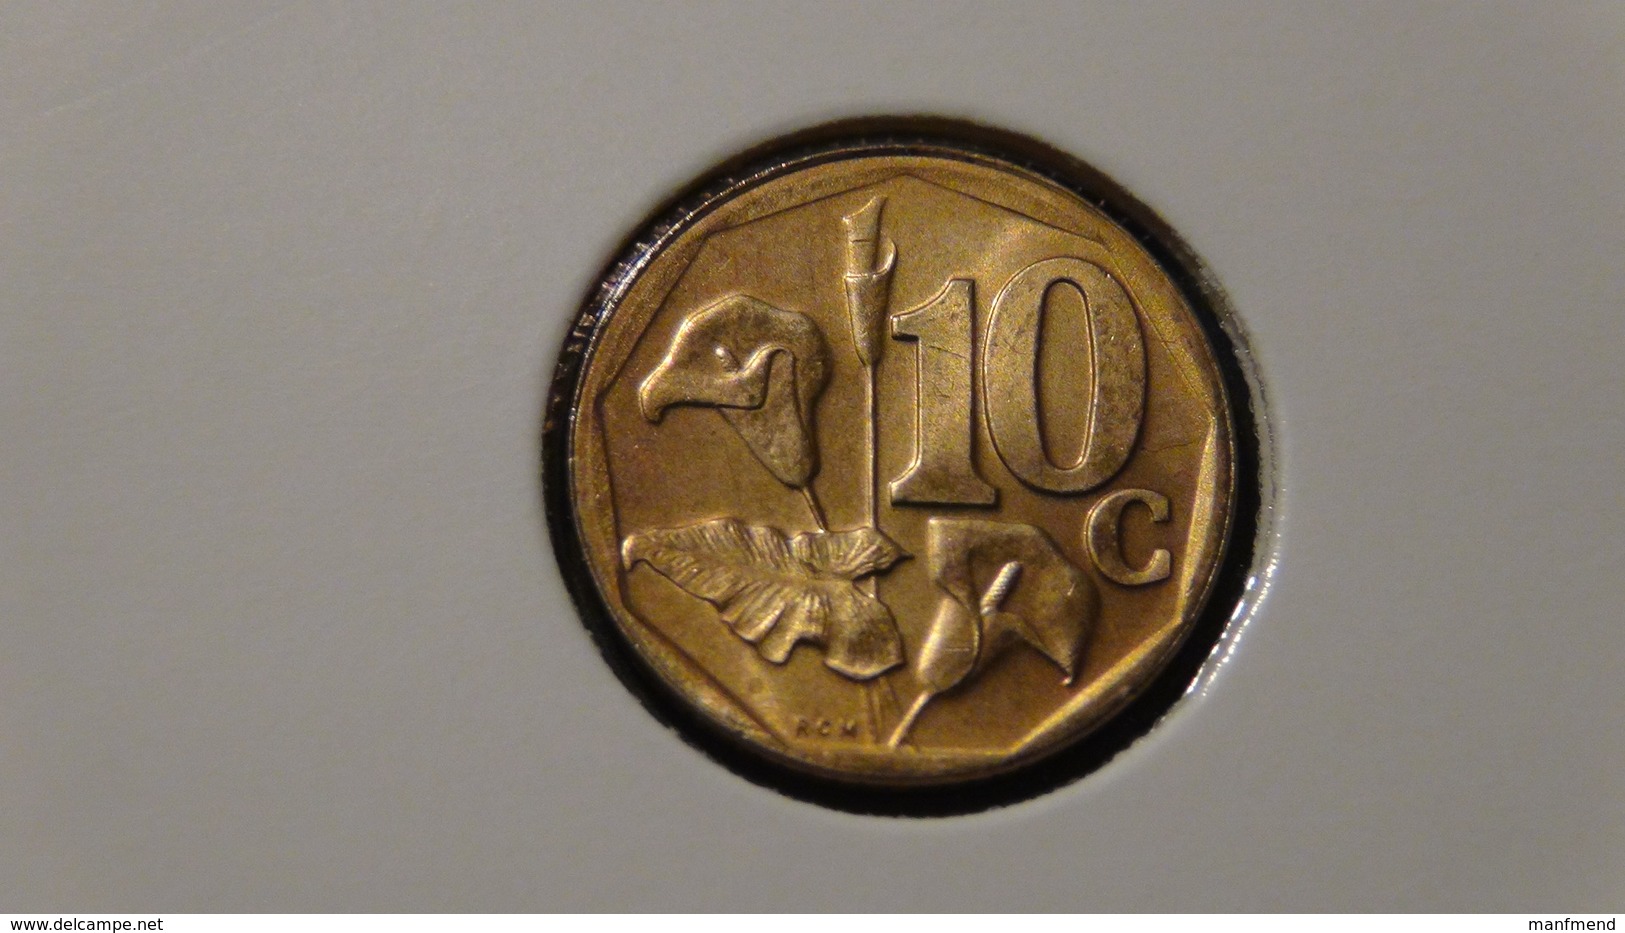 South Africa - 2001 - 10 Cents - KM 224 - Unc - Look Scans - Südafrika